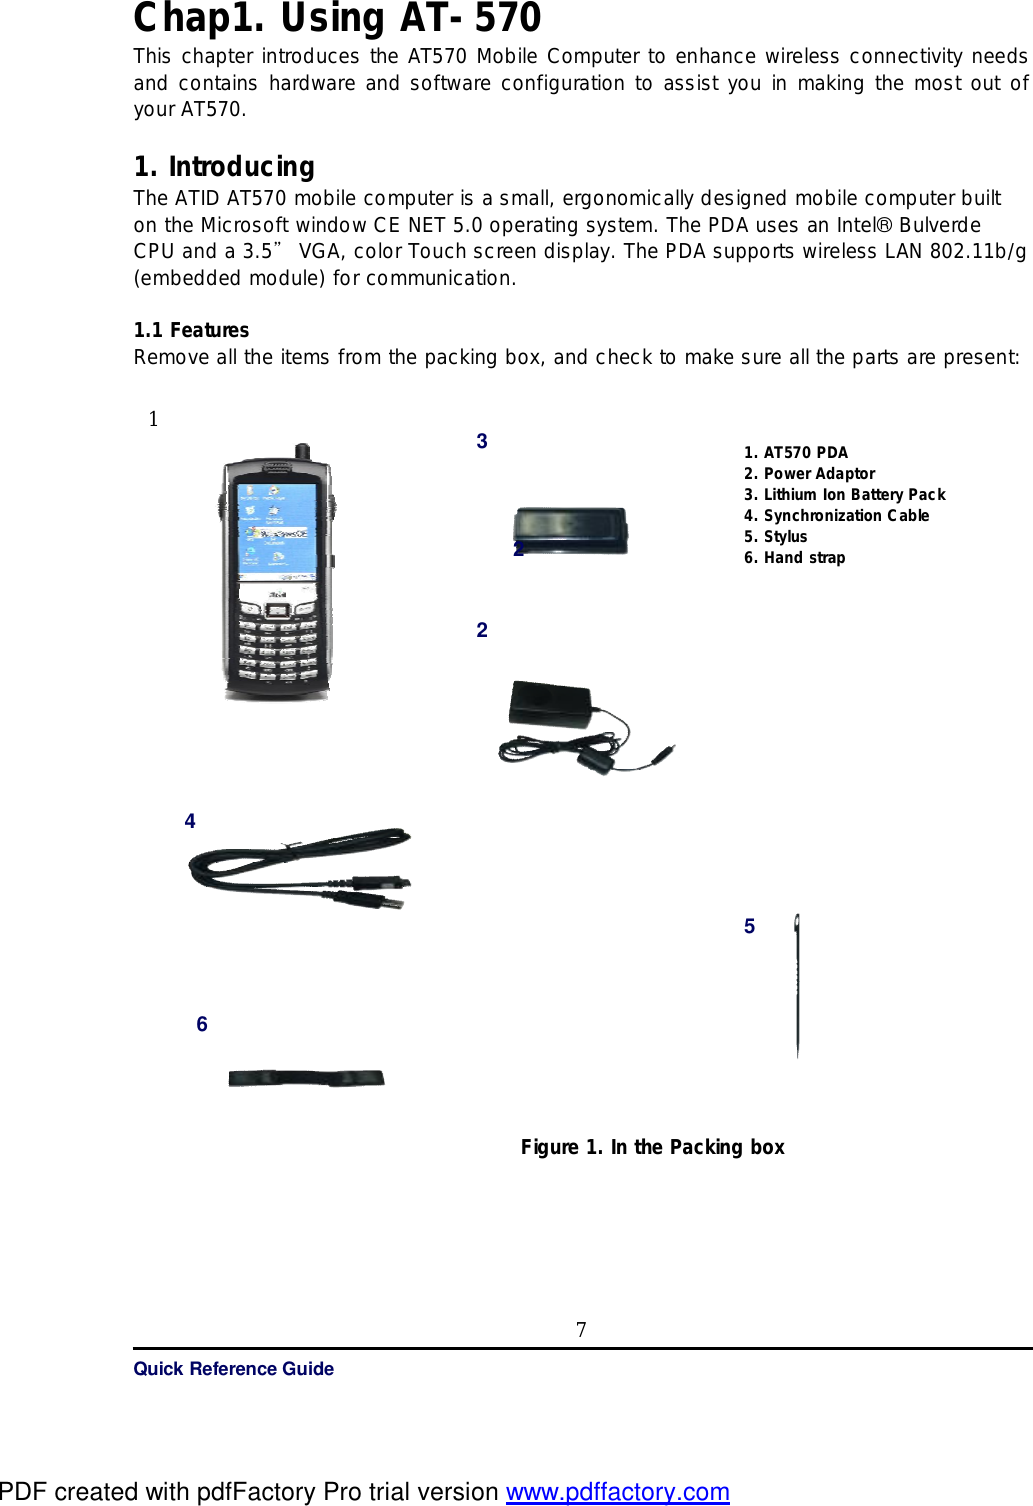   Quick Reference Guide 7Chap1. Using AT-570 This chapter introduces the AT570 Mobile Computer to enhance wireless connectivity needs and contains hardware and software configuration to assist you in making the most out of your AT570.  1. Introducing  The ATID AT570 mobile computer is a small, ergonomically designed mobile computer built on the Microsoft window CE NET 5.0 operating system. The PDA uses an Intel® Bulverde CPU and a 3.5” VGA, color Touch screen display. The PDA supports wireless LAN 802.11b/g (embedded module) for communication.  1.1 Features  Remove all the items from the packing box, and check to make sure all the parts are present:                                                 Figure 1. In the Packing box    4 2 6 1. AT570 PDA  2. Power Adaptor 3. Lithium Ion Battery Pack  4. Synchronization Cable 5. Stylus 6. Hand strap  3 2 5 1 PDF created with pdfFactory Pro trial version www.pdffactory.com